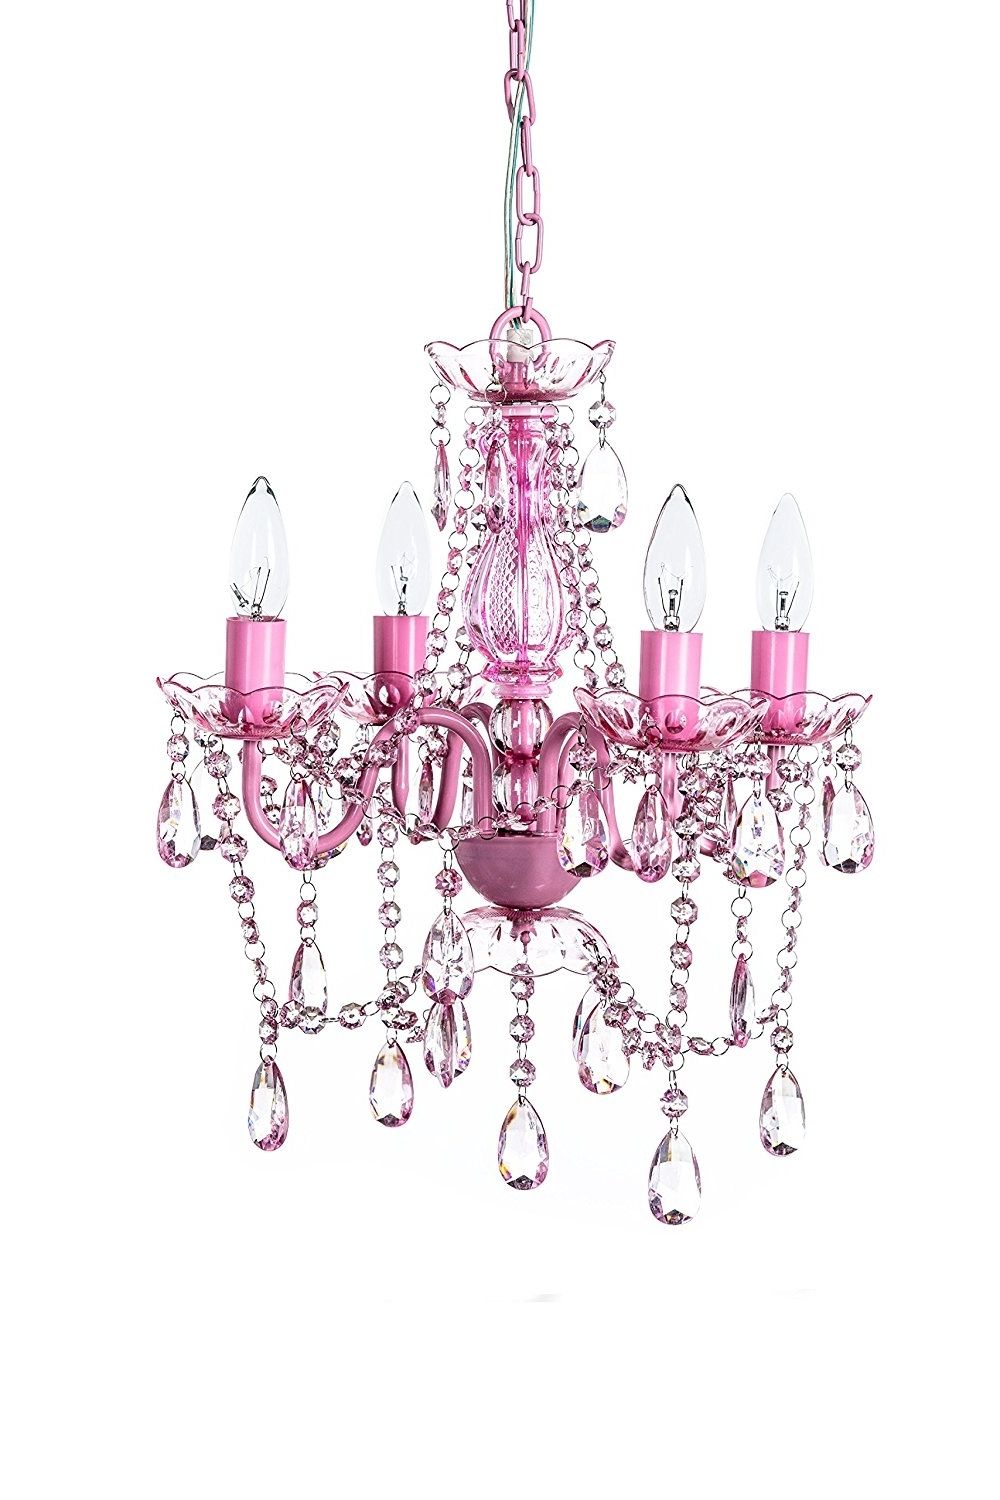 2017 Small Gypsy Chandeliers Inside The Original Gypsy Color 4 Light Small Pink Chandelier H  (View 9 of 15)